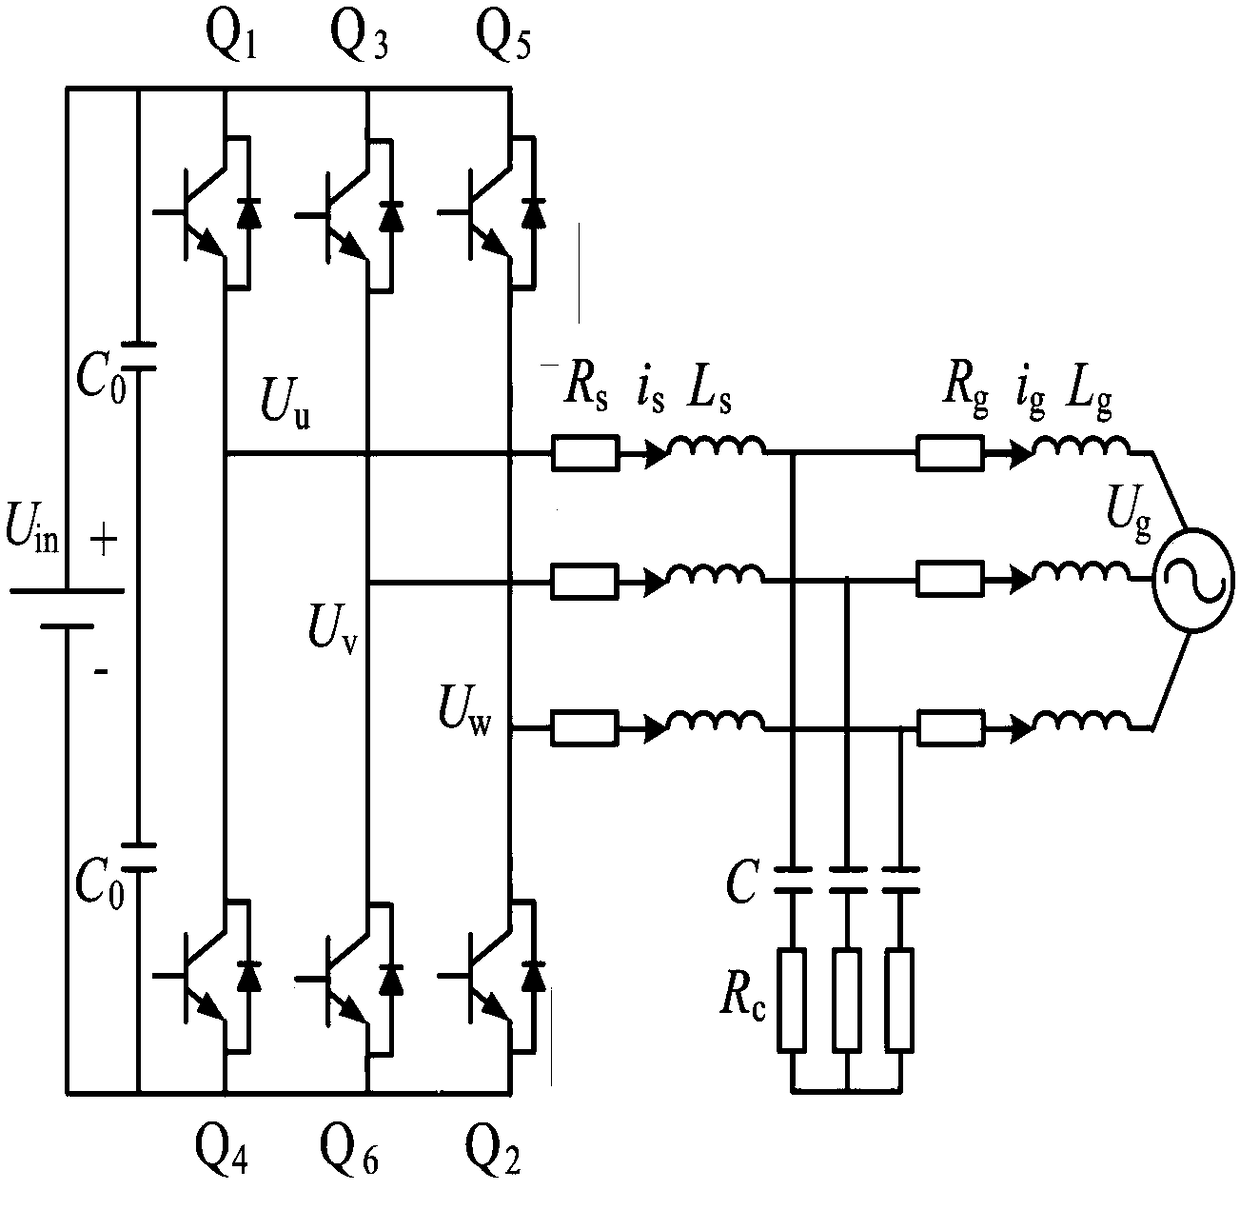 A control method for a photovoltaic lcl type grid-connected inverter